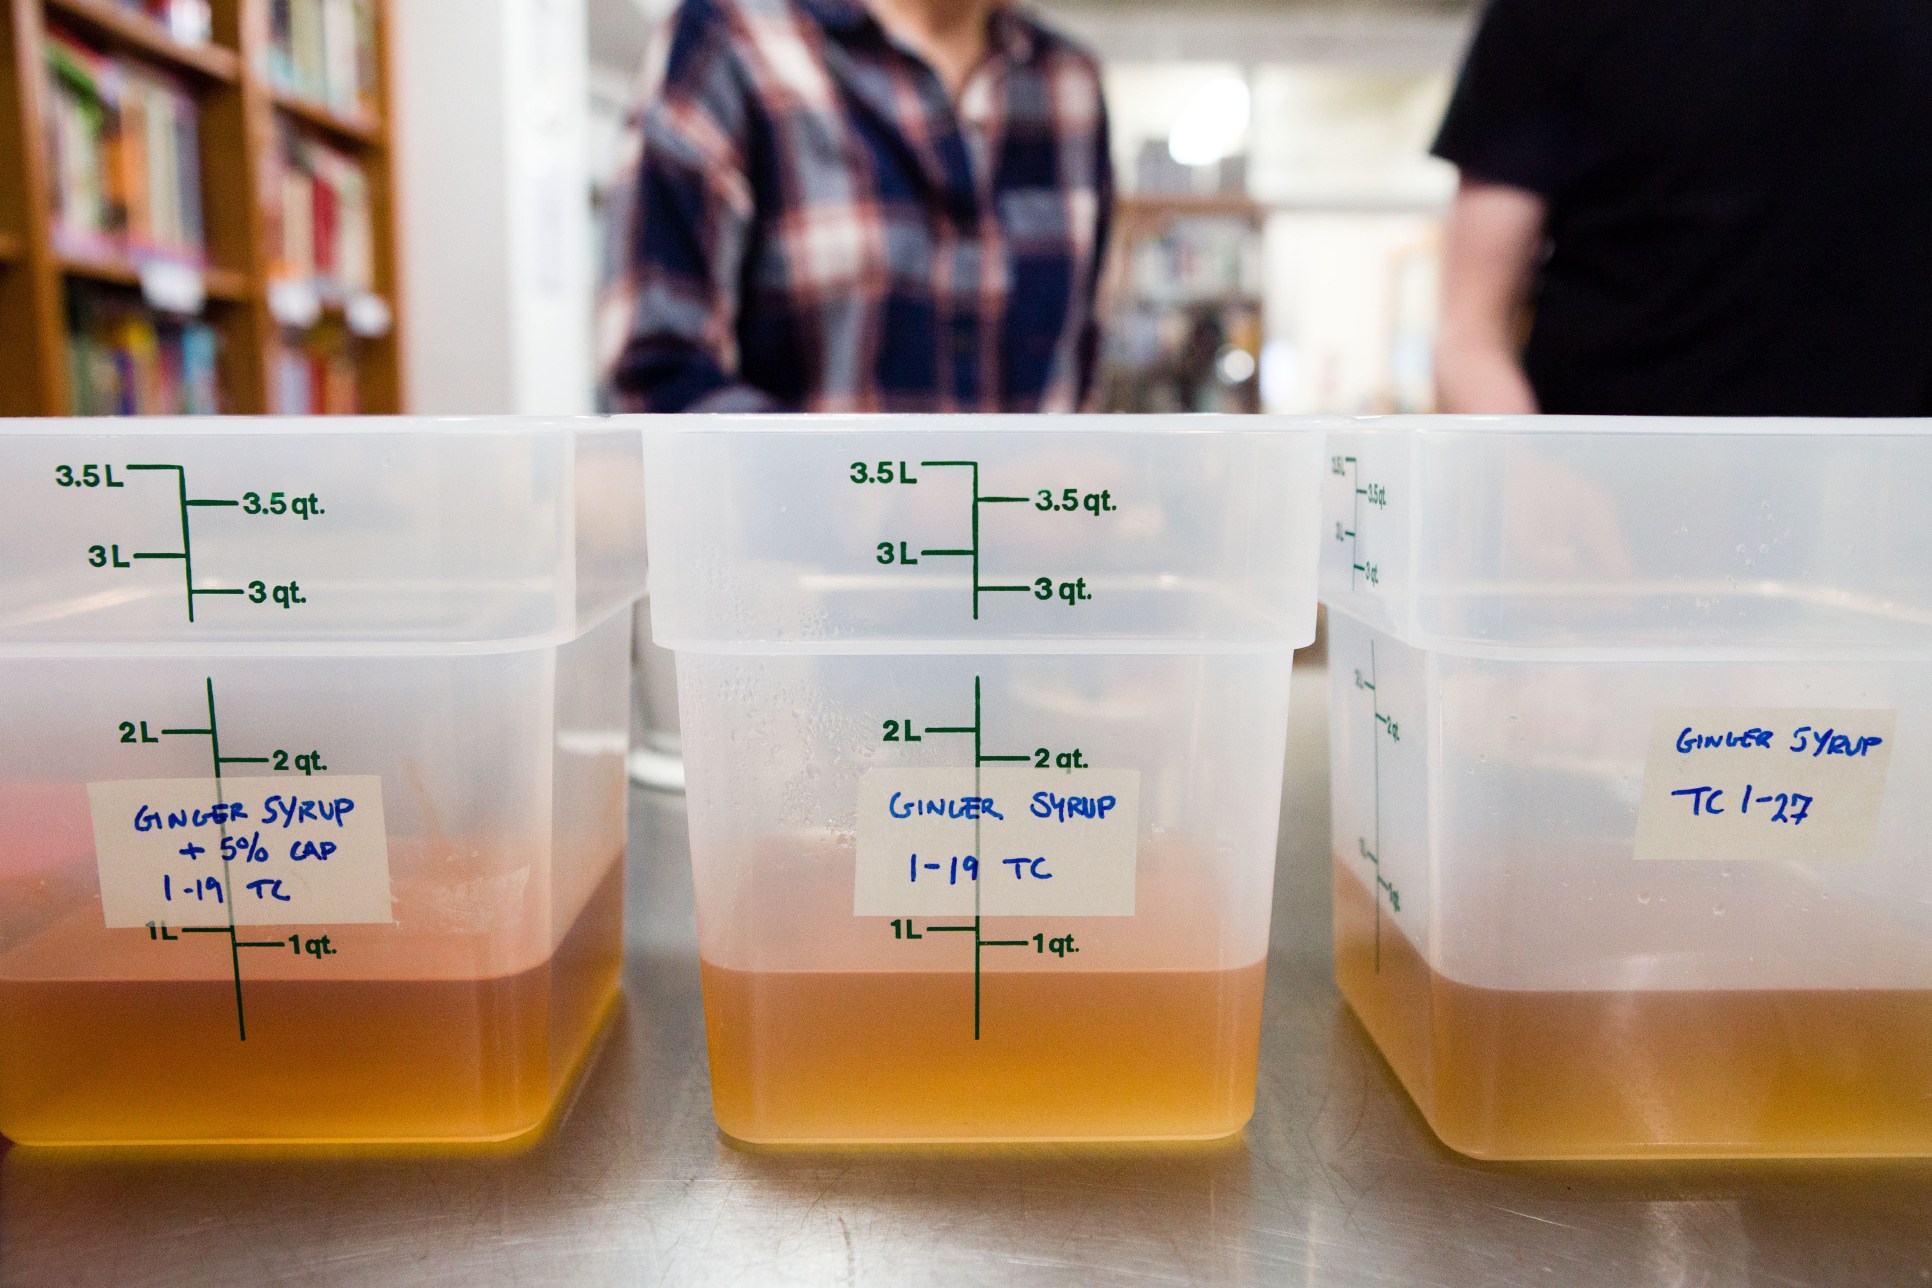 Different formulas of ginger syrup sit ready to taste as associate editor Tim Chin experiments with compounds associated with spiciness for an upcoming article.